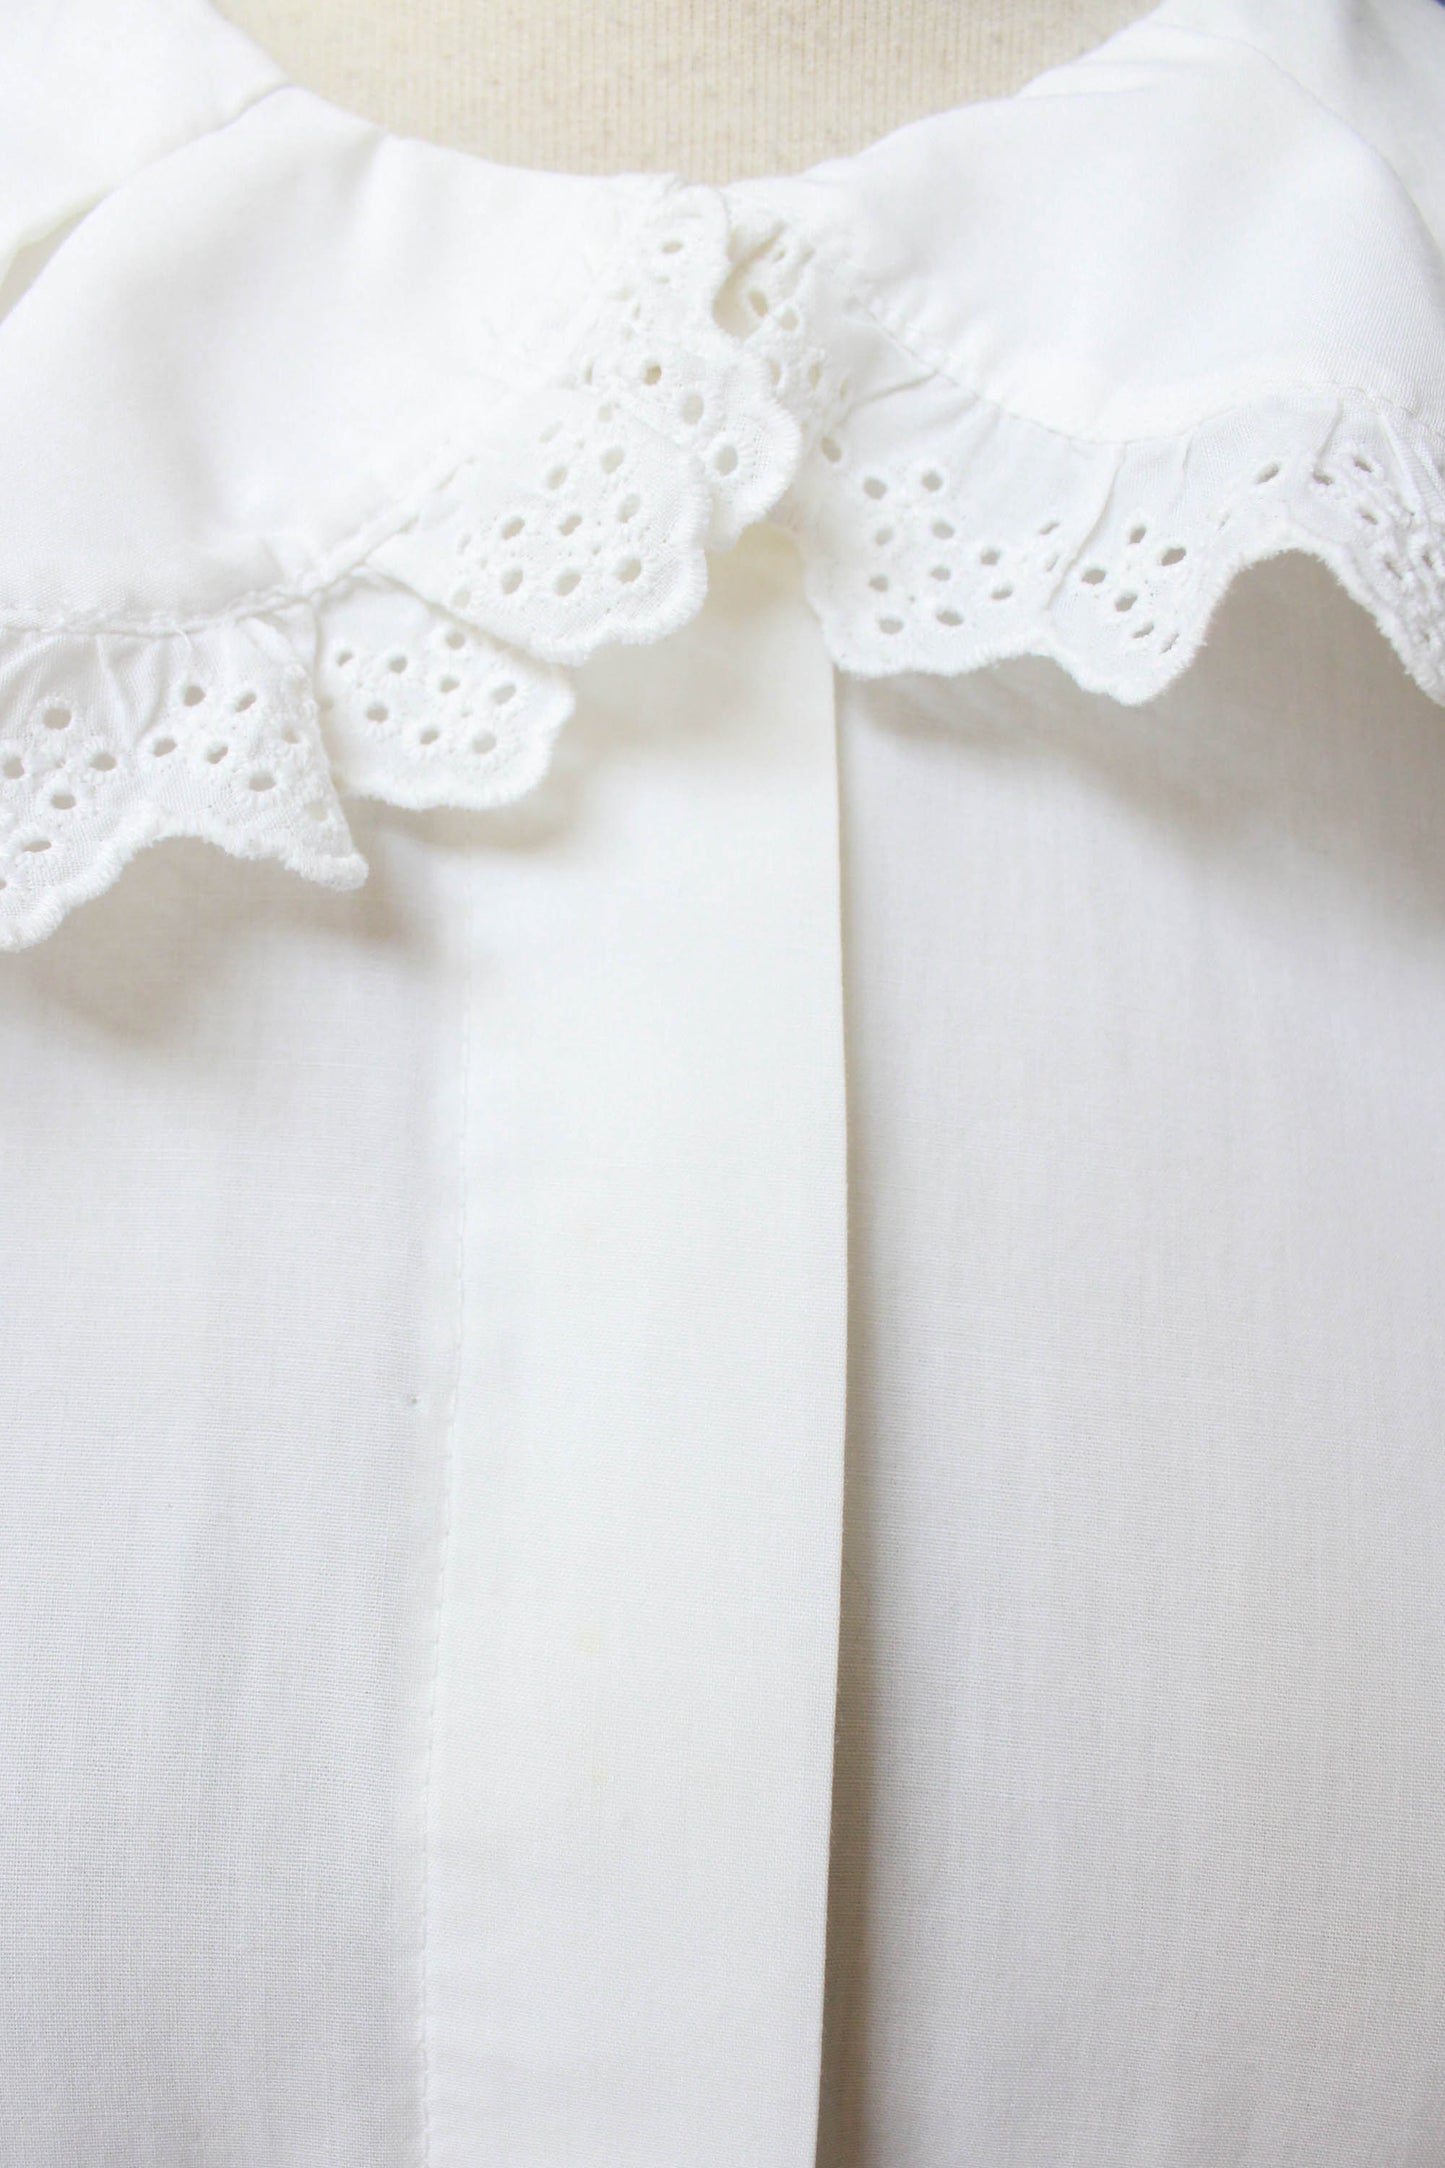 1980s large statement collar blouse with a peter pan rounded collar, trimmed in lace. white crisp cotton vintage blouse 